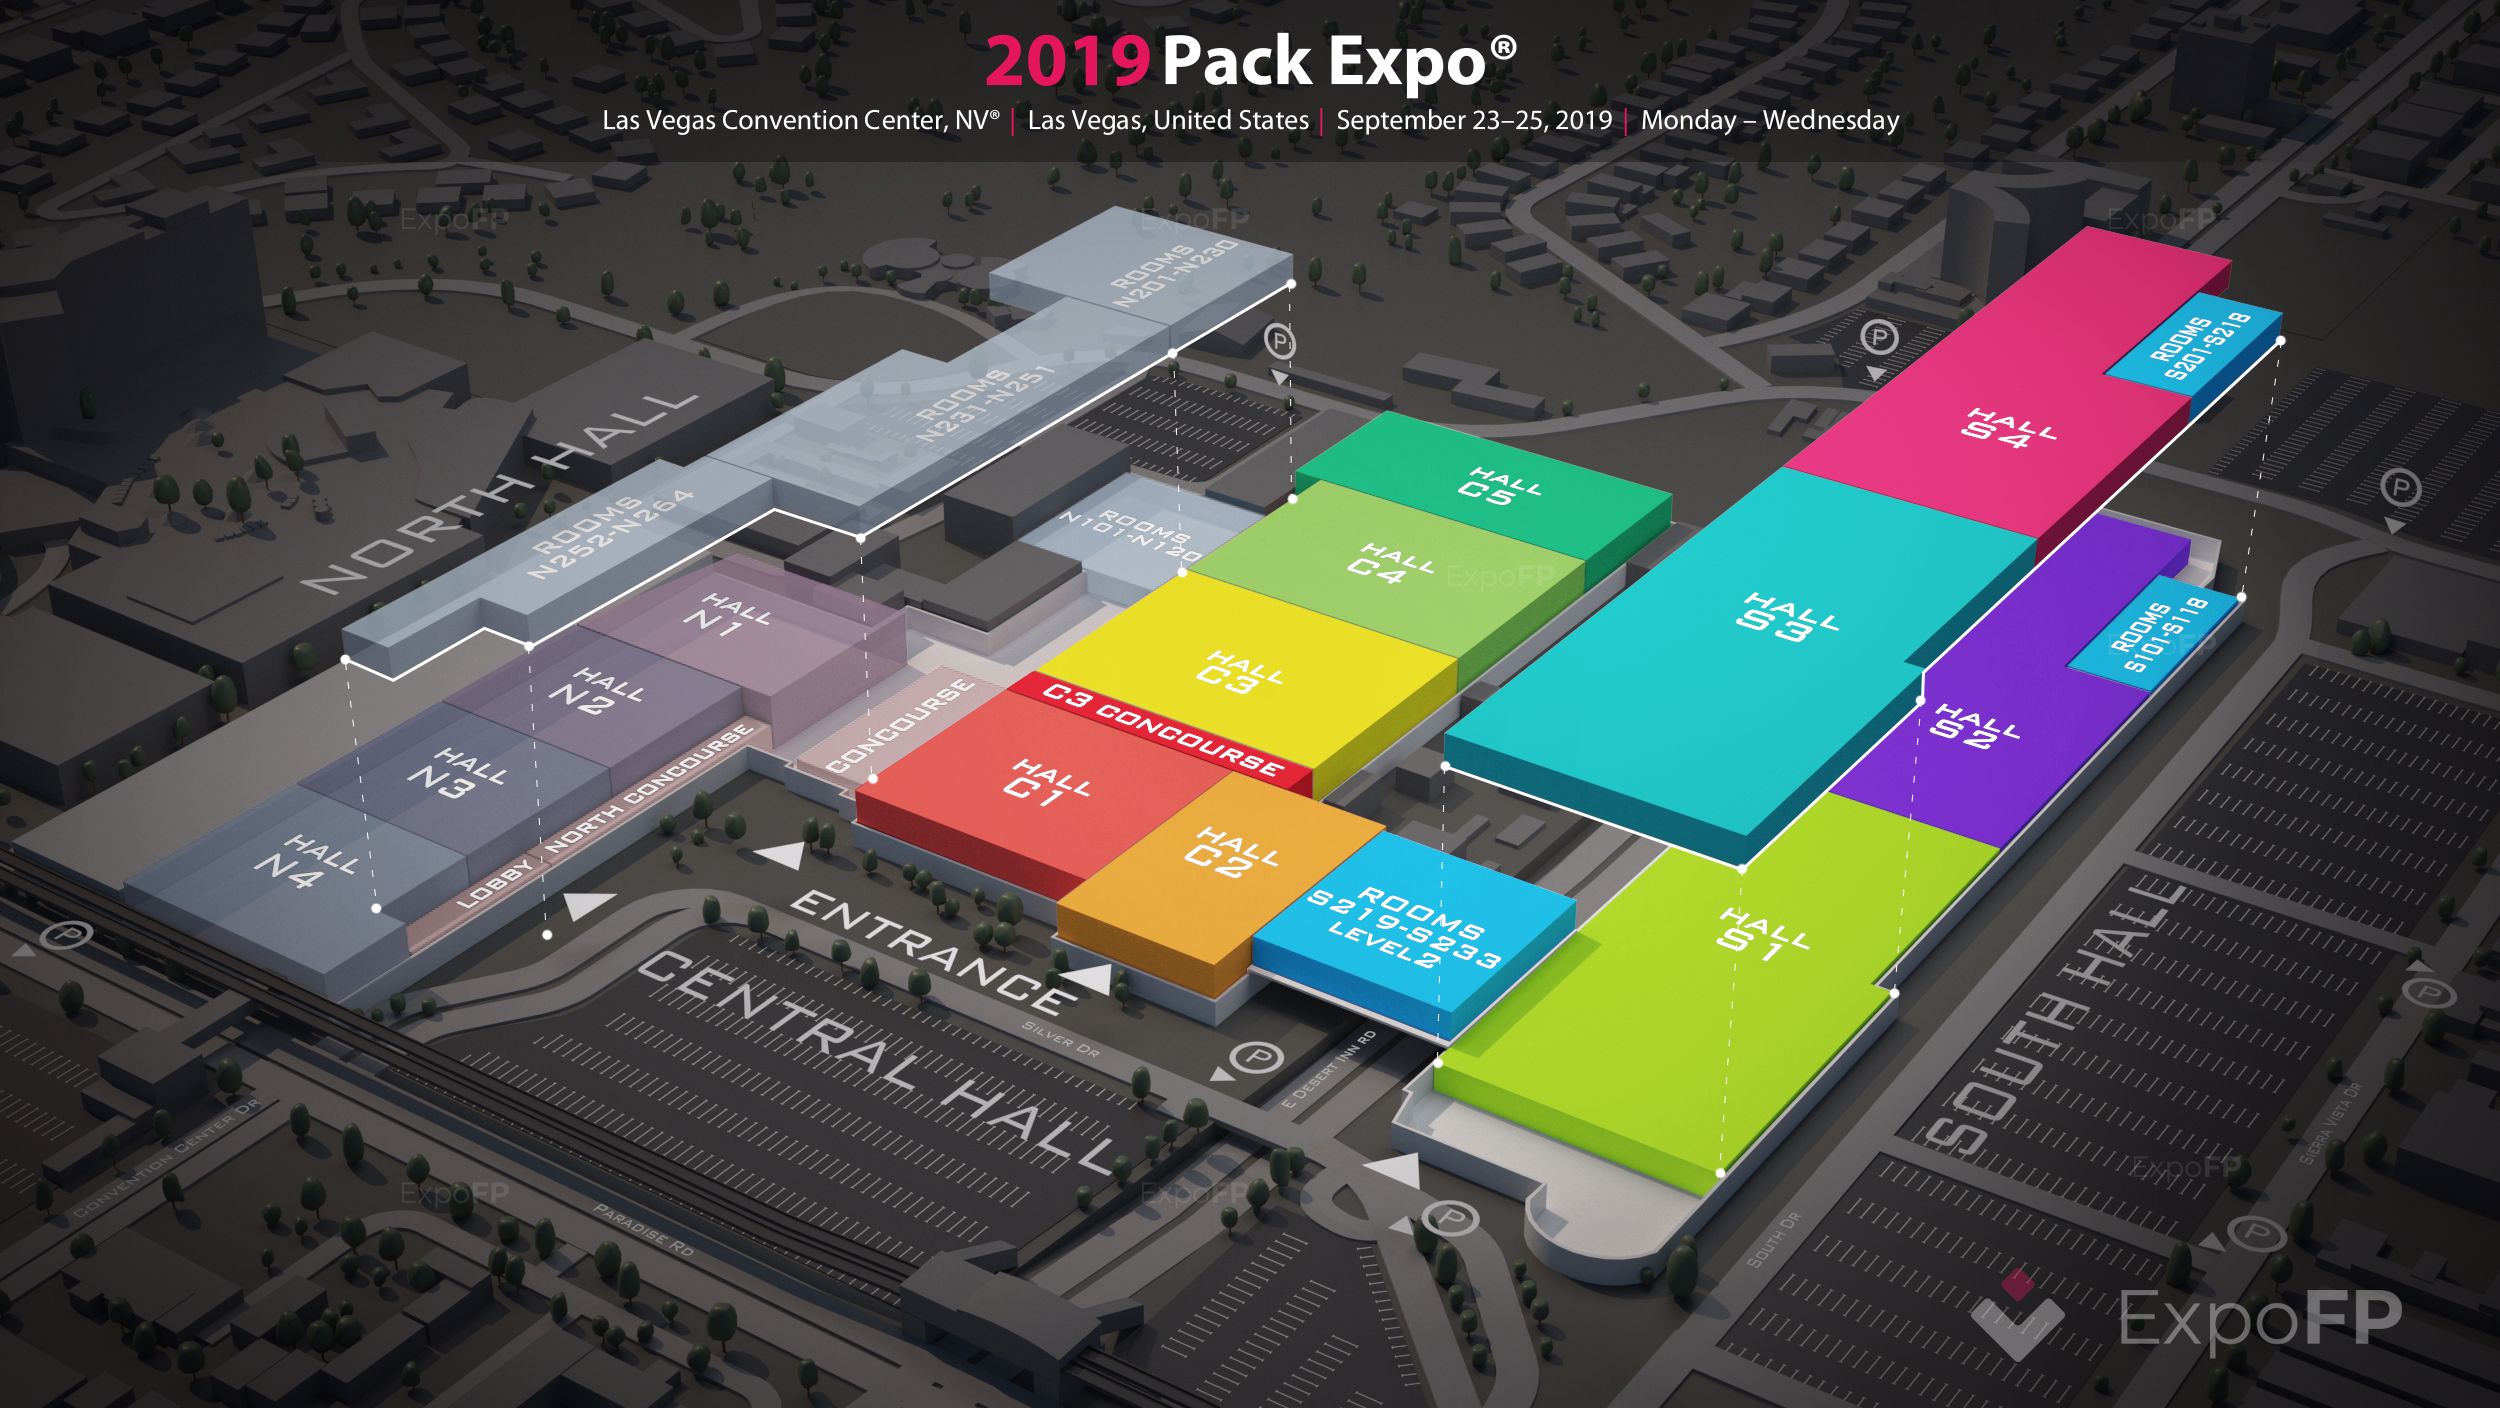 Pack Expo 2019 in Las Vegas Convention Center, NV